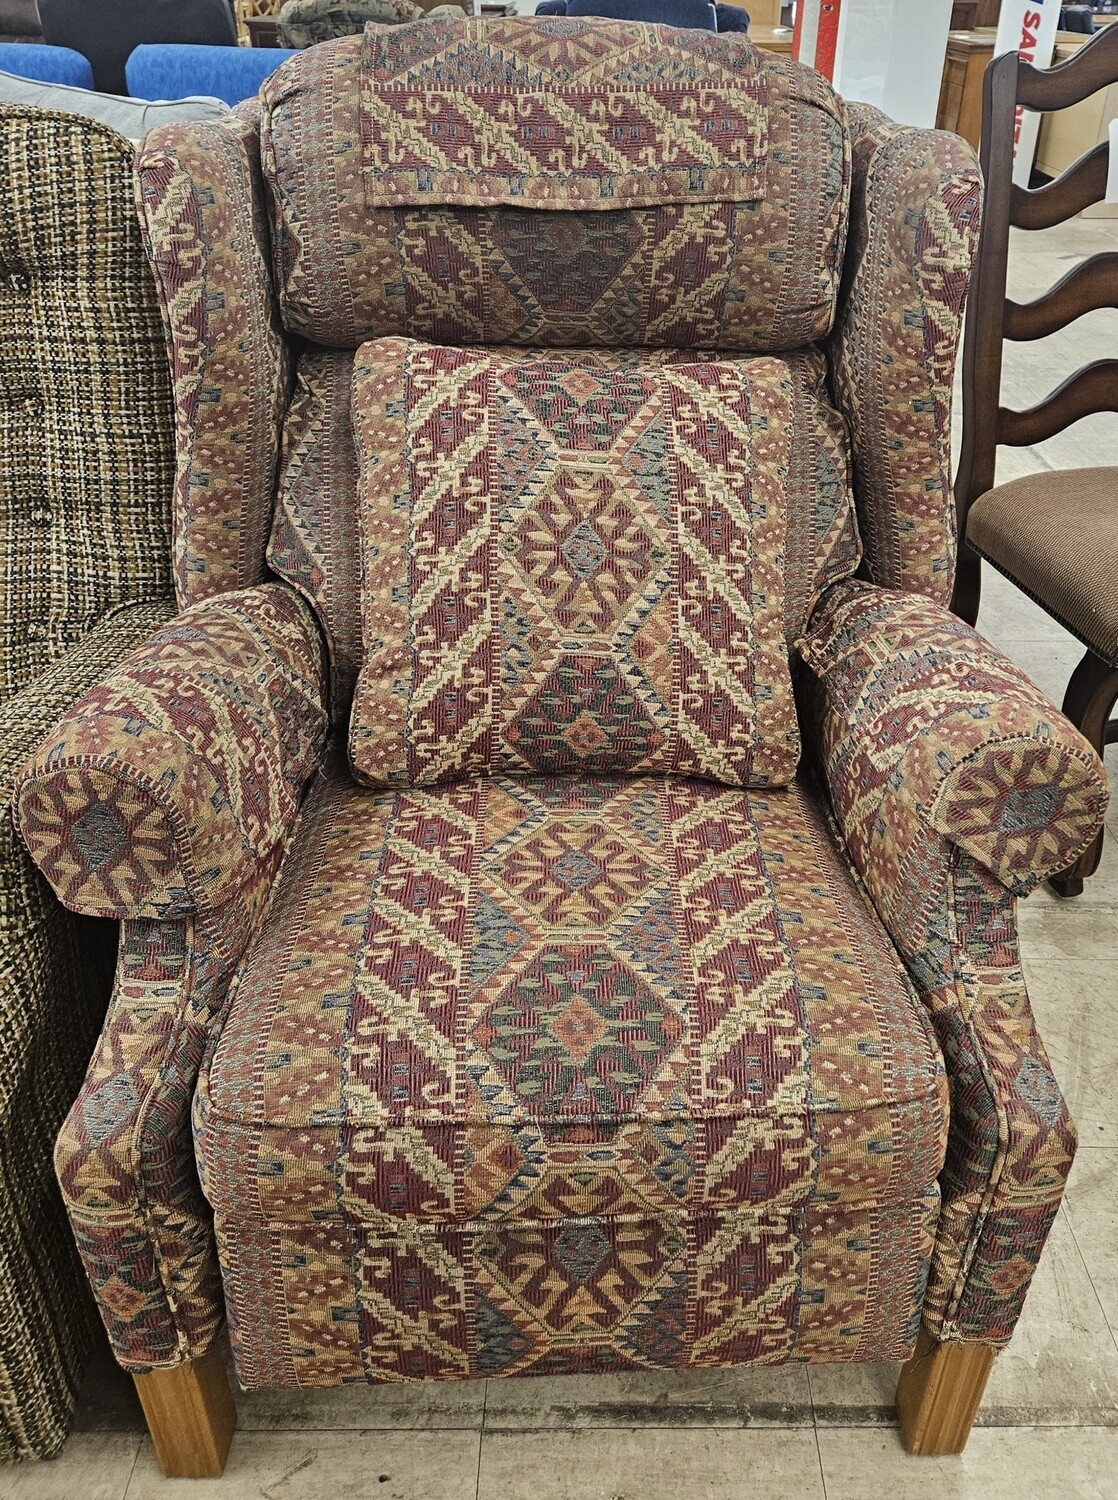 Colorful Upholstered Recliner Chair